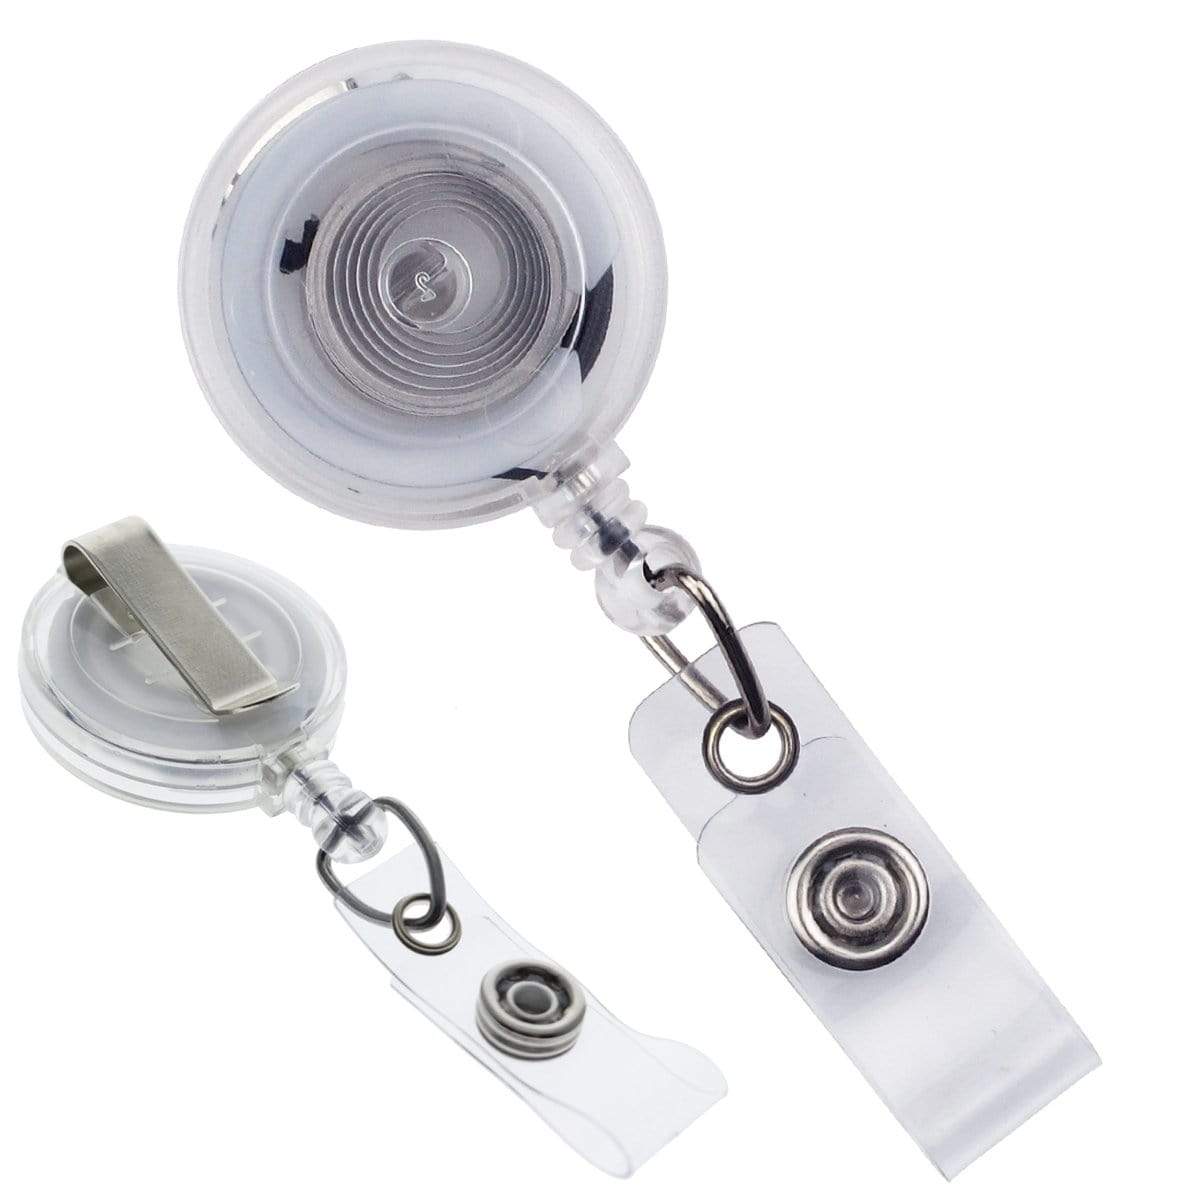 Translucent Clear Retractable Badge Reel with Belt Clip (2120-360X) -  Translucent White (clear)